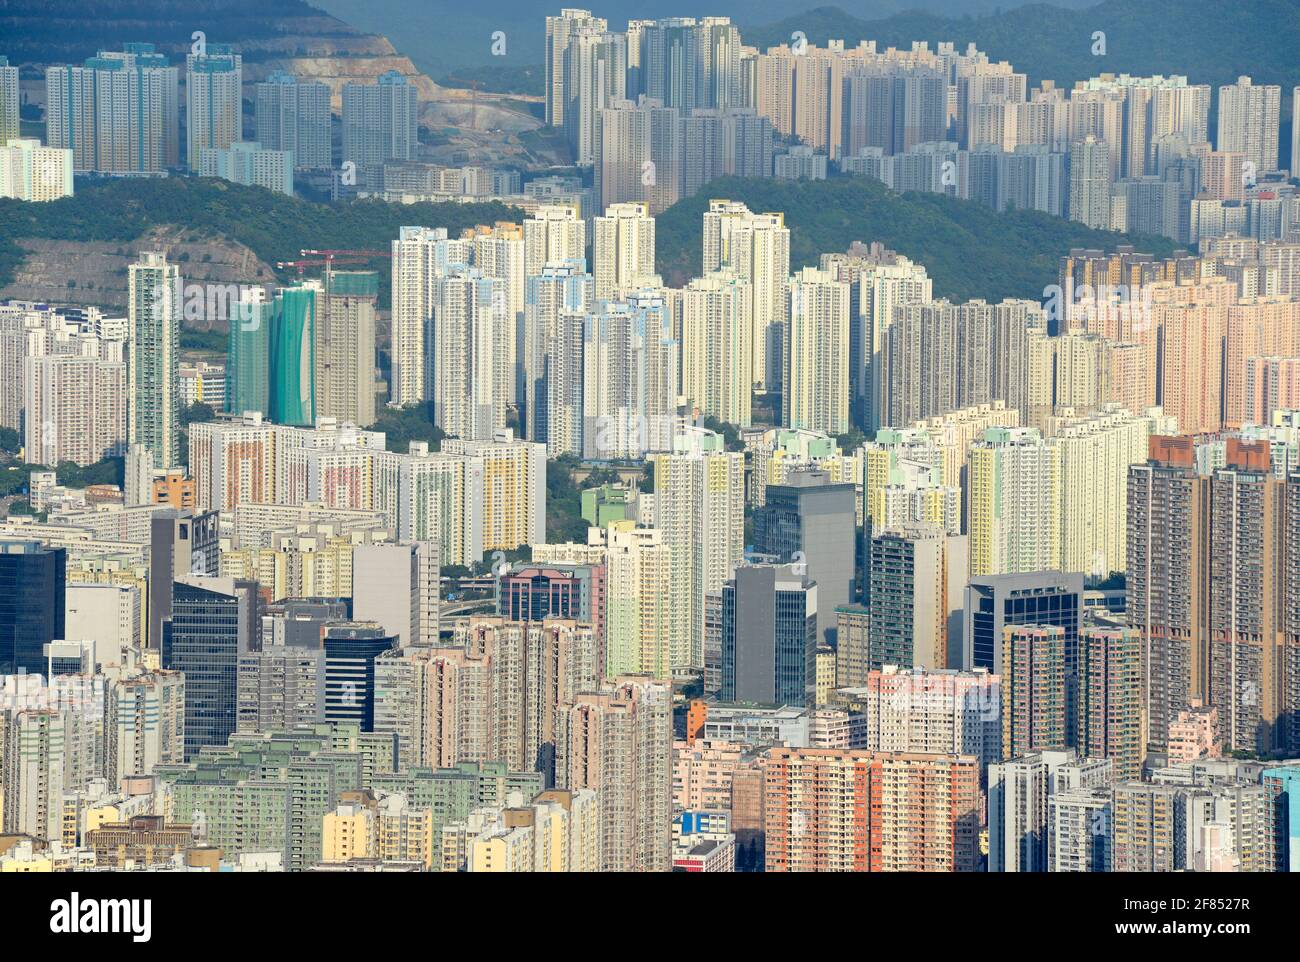 View over the Kowloon peninsular in Hong Kong, China, taken from the Kowloon hills to the north Stock Photo